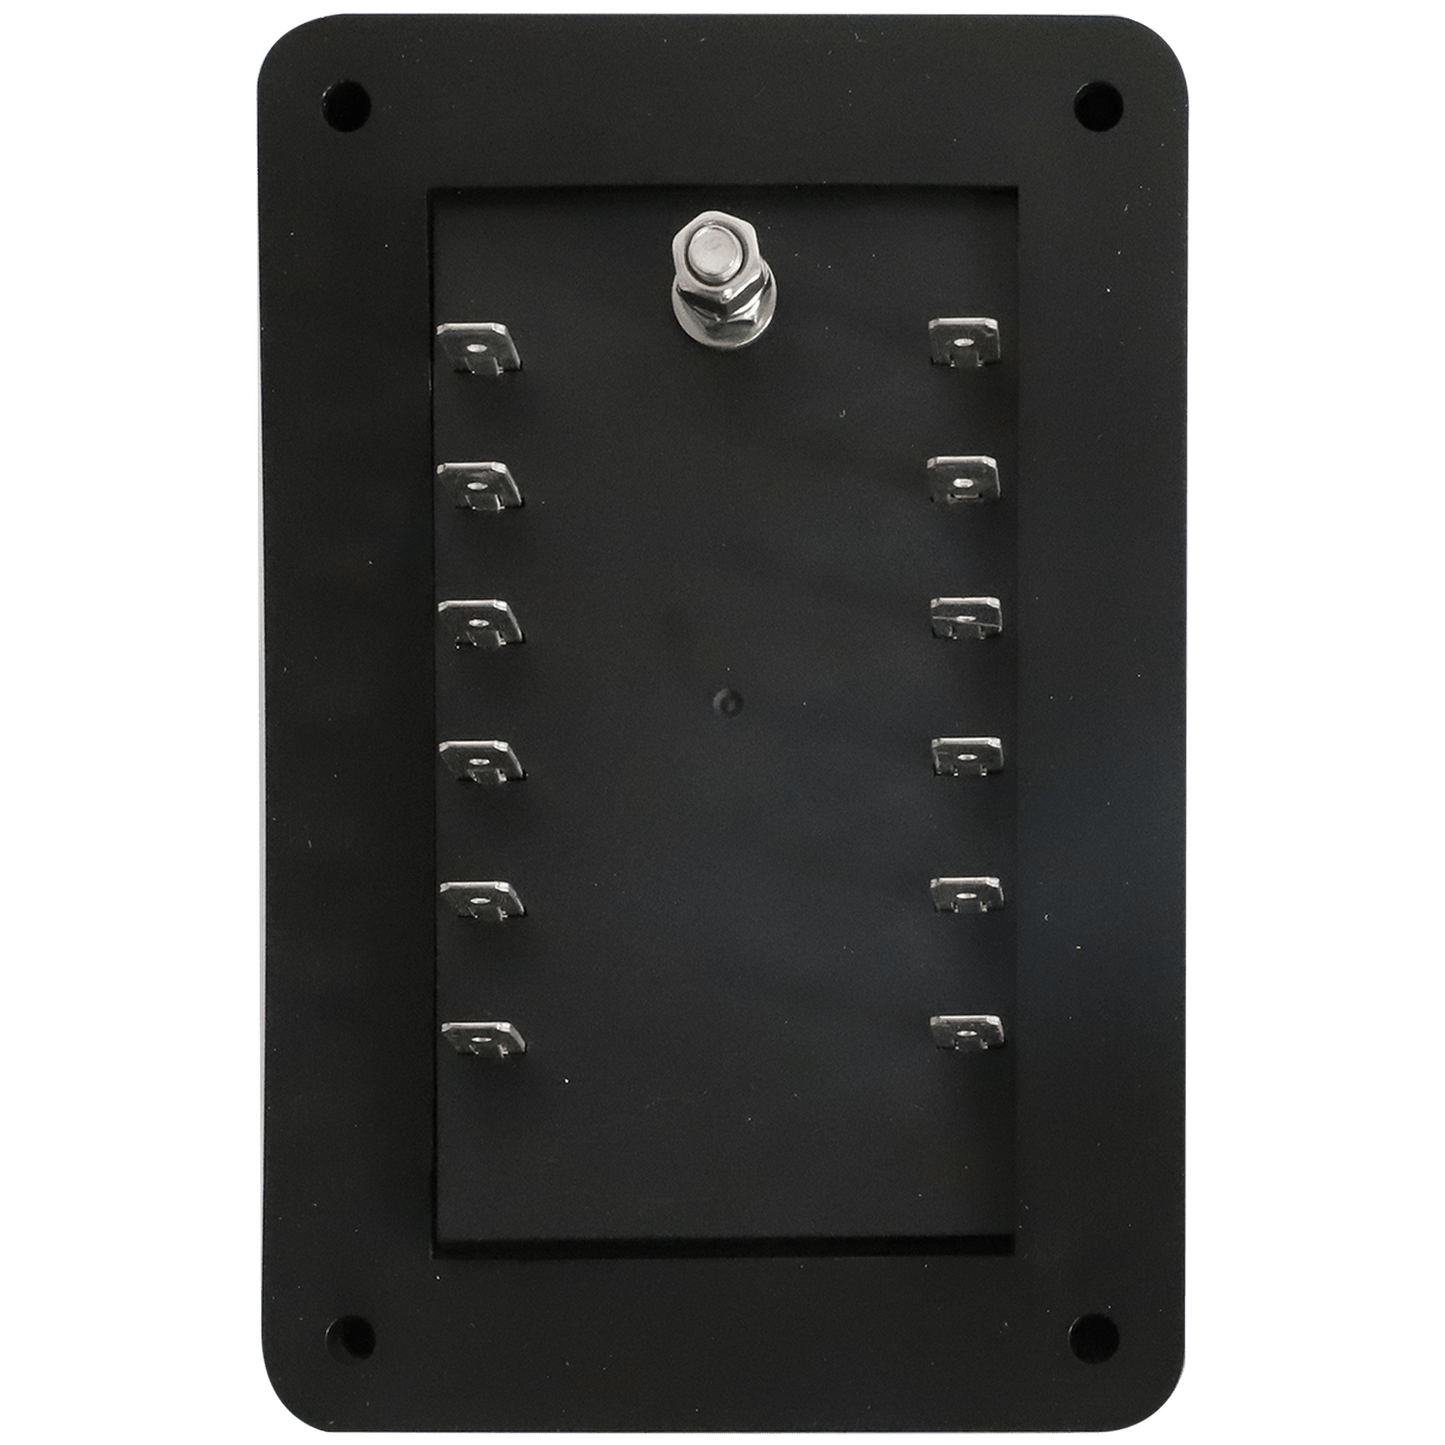 Enerdrive Fuse Block Panel Mount 1 In 12 Out with LEDs